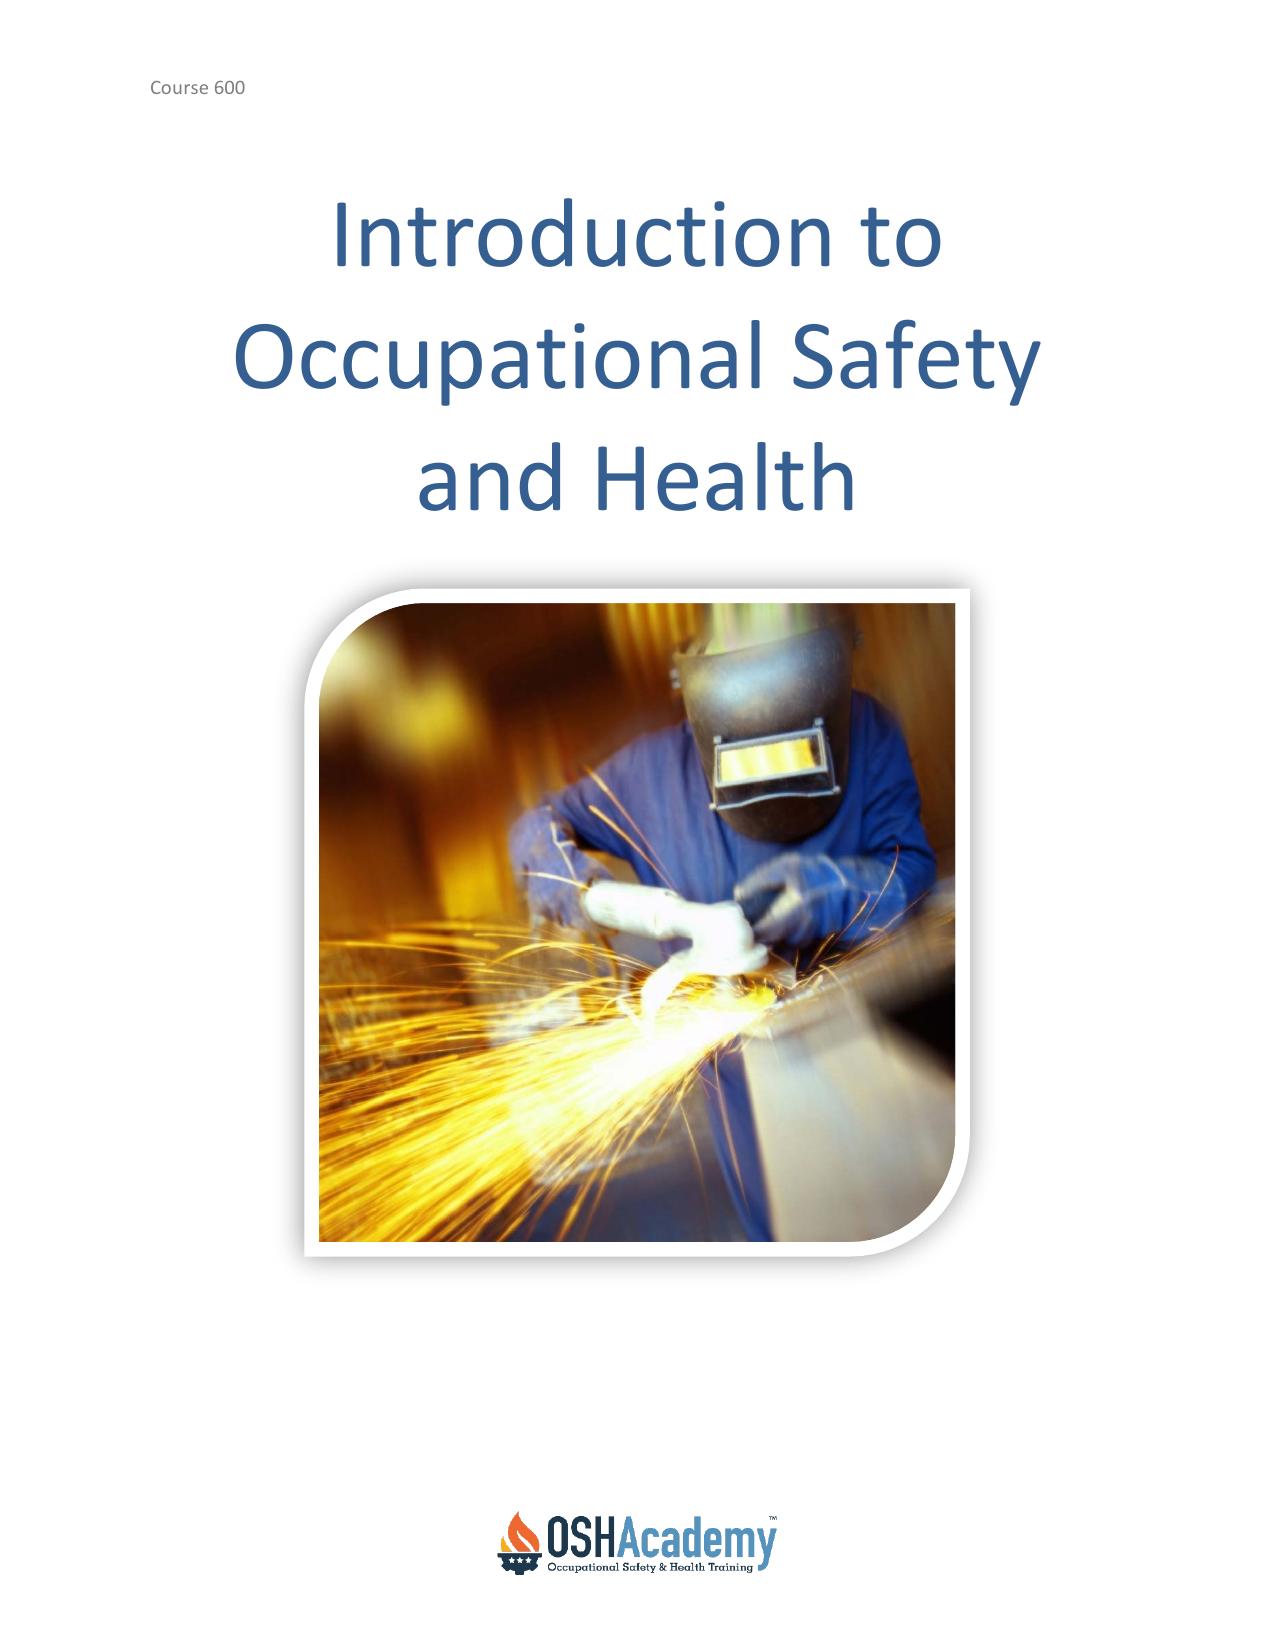 Introduction To Occupational Safety and Health 2015.pdf